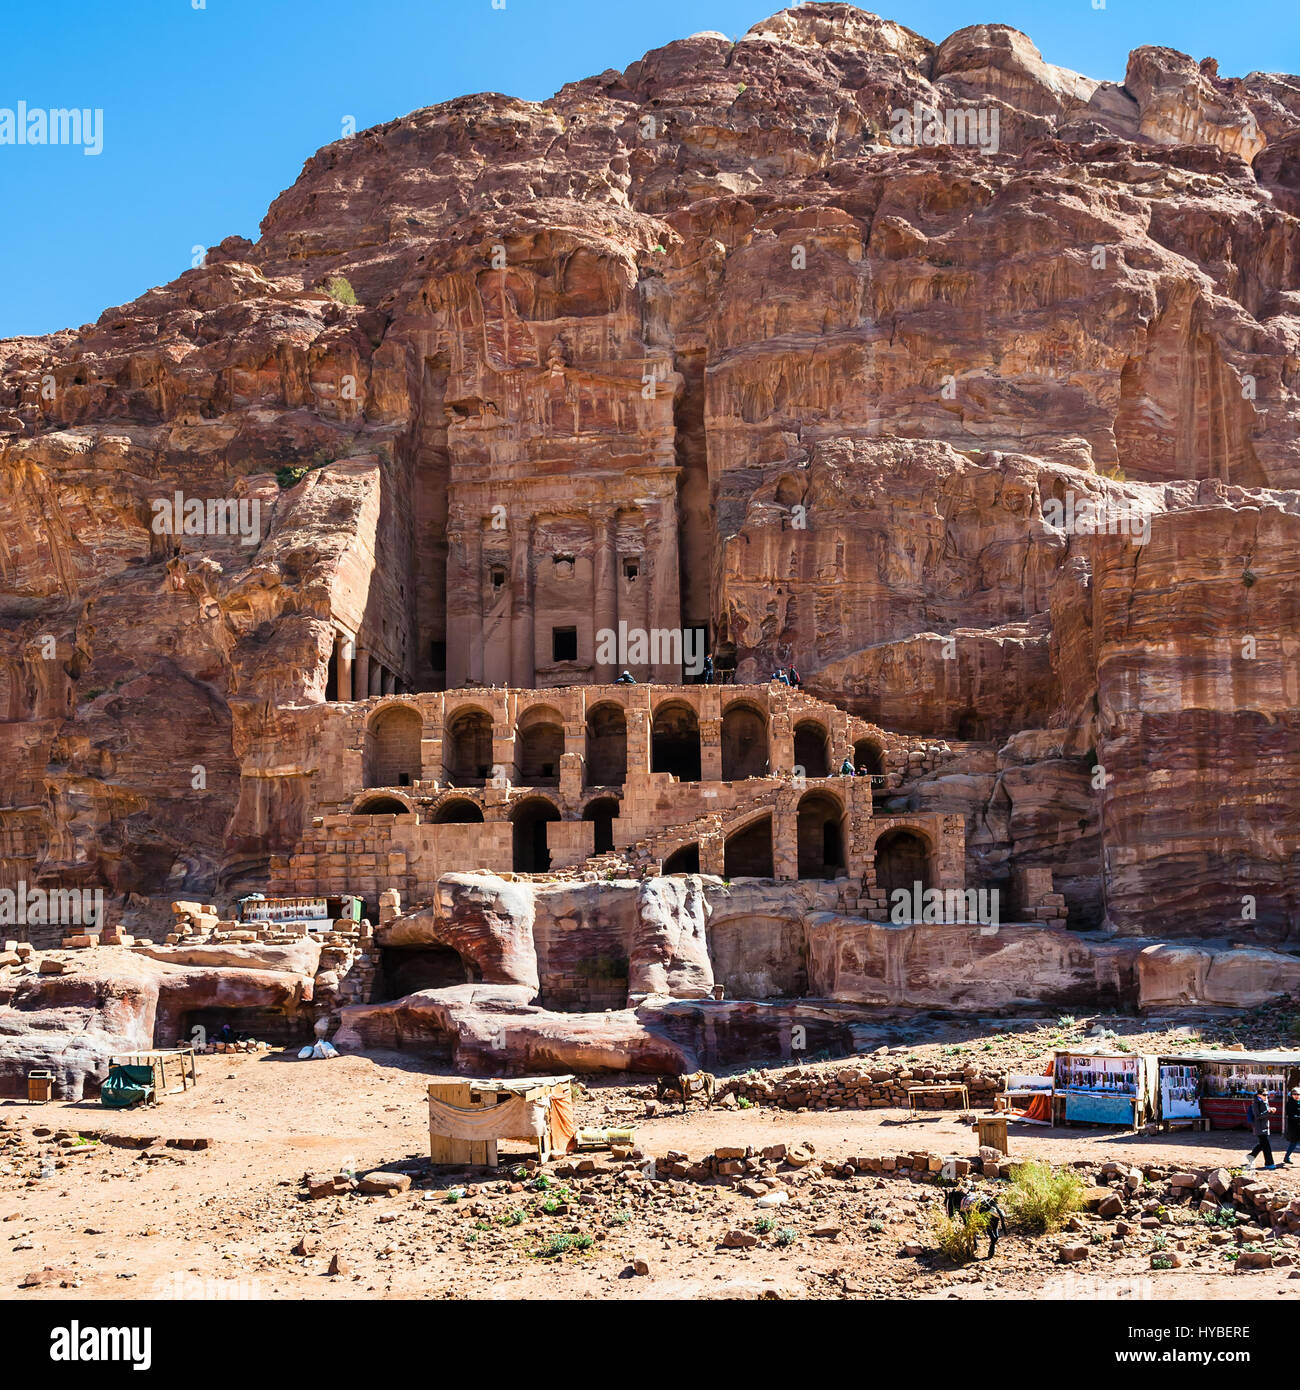 PETRA, JORDAN - FEBRUARY 21, 2012: bedouin camp and Royal Urn Tomb in ancient Petra town. Rock-cut town Petra was established about 312 BC as the capi Stock Photo